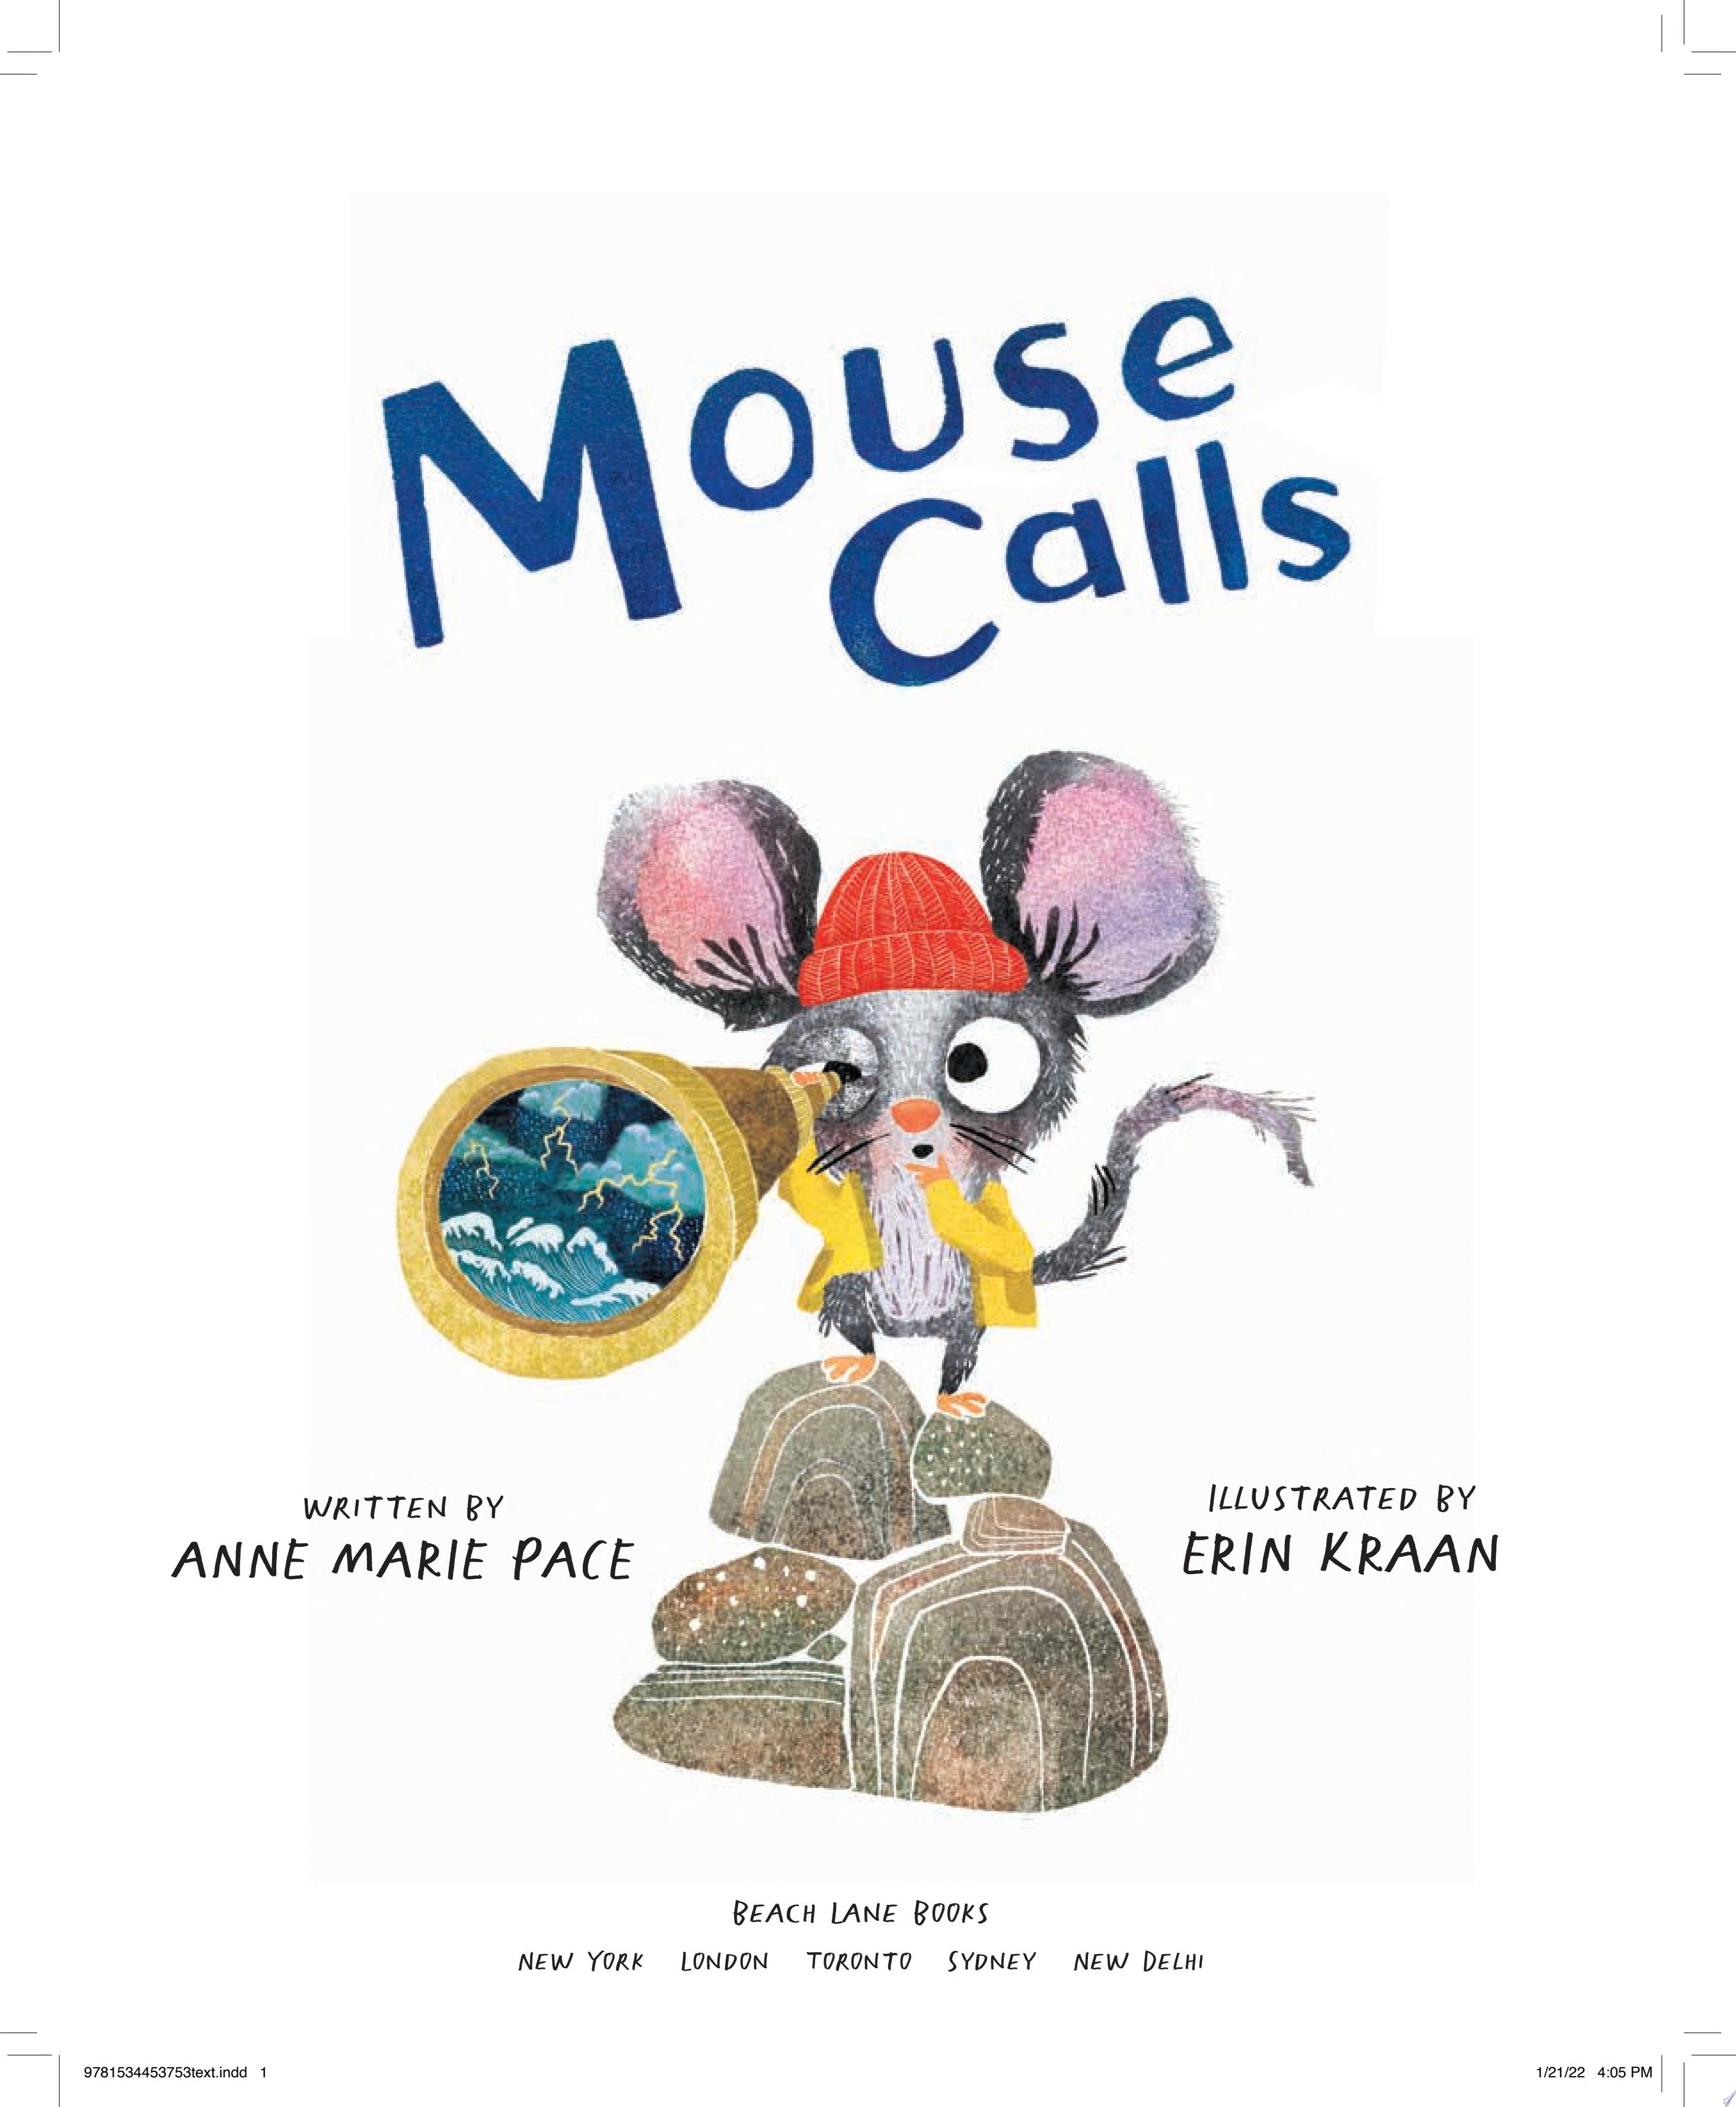 Image for "Mouse Calls"